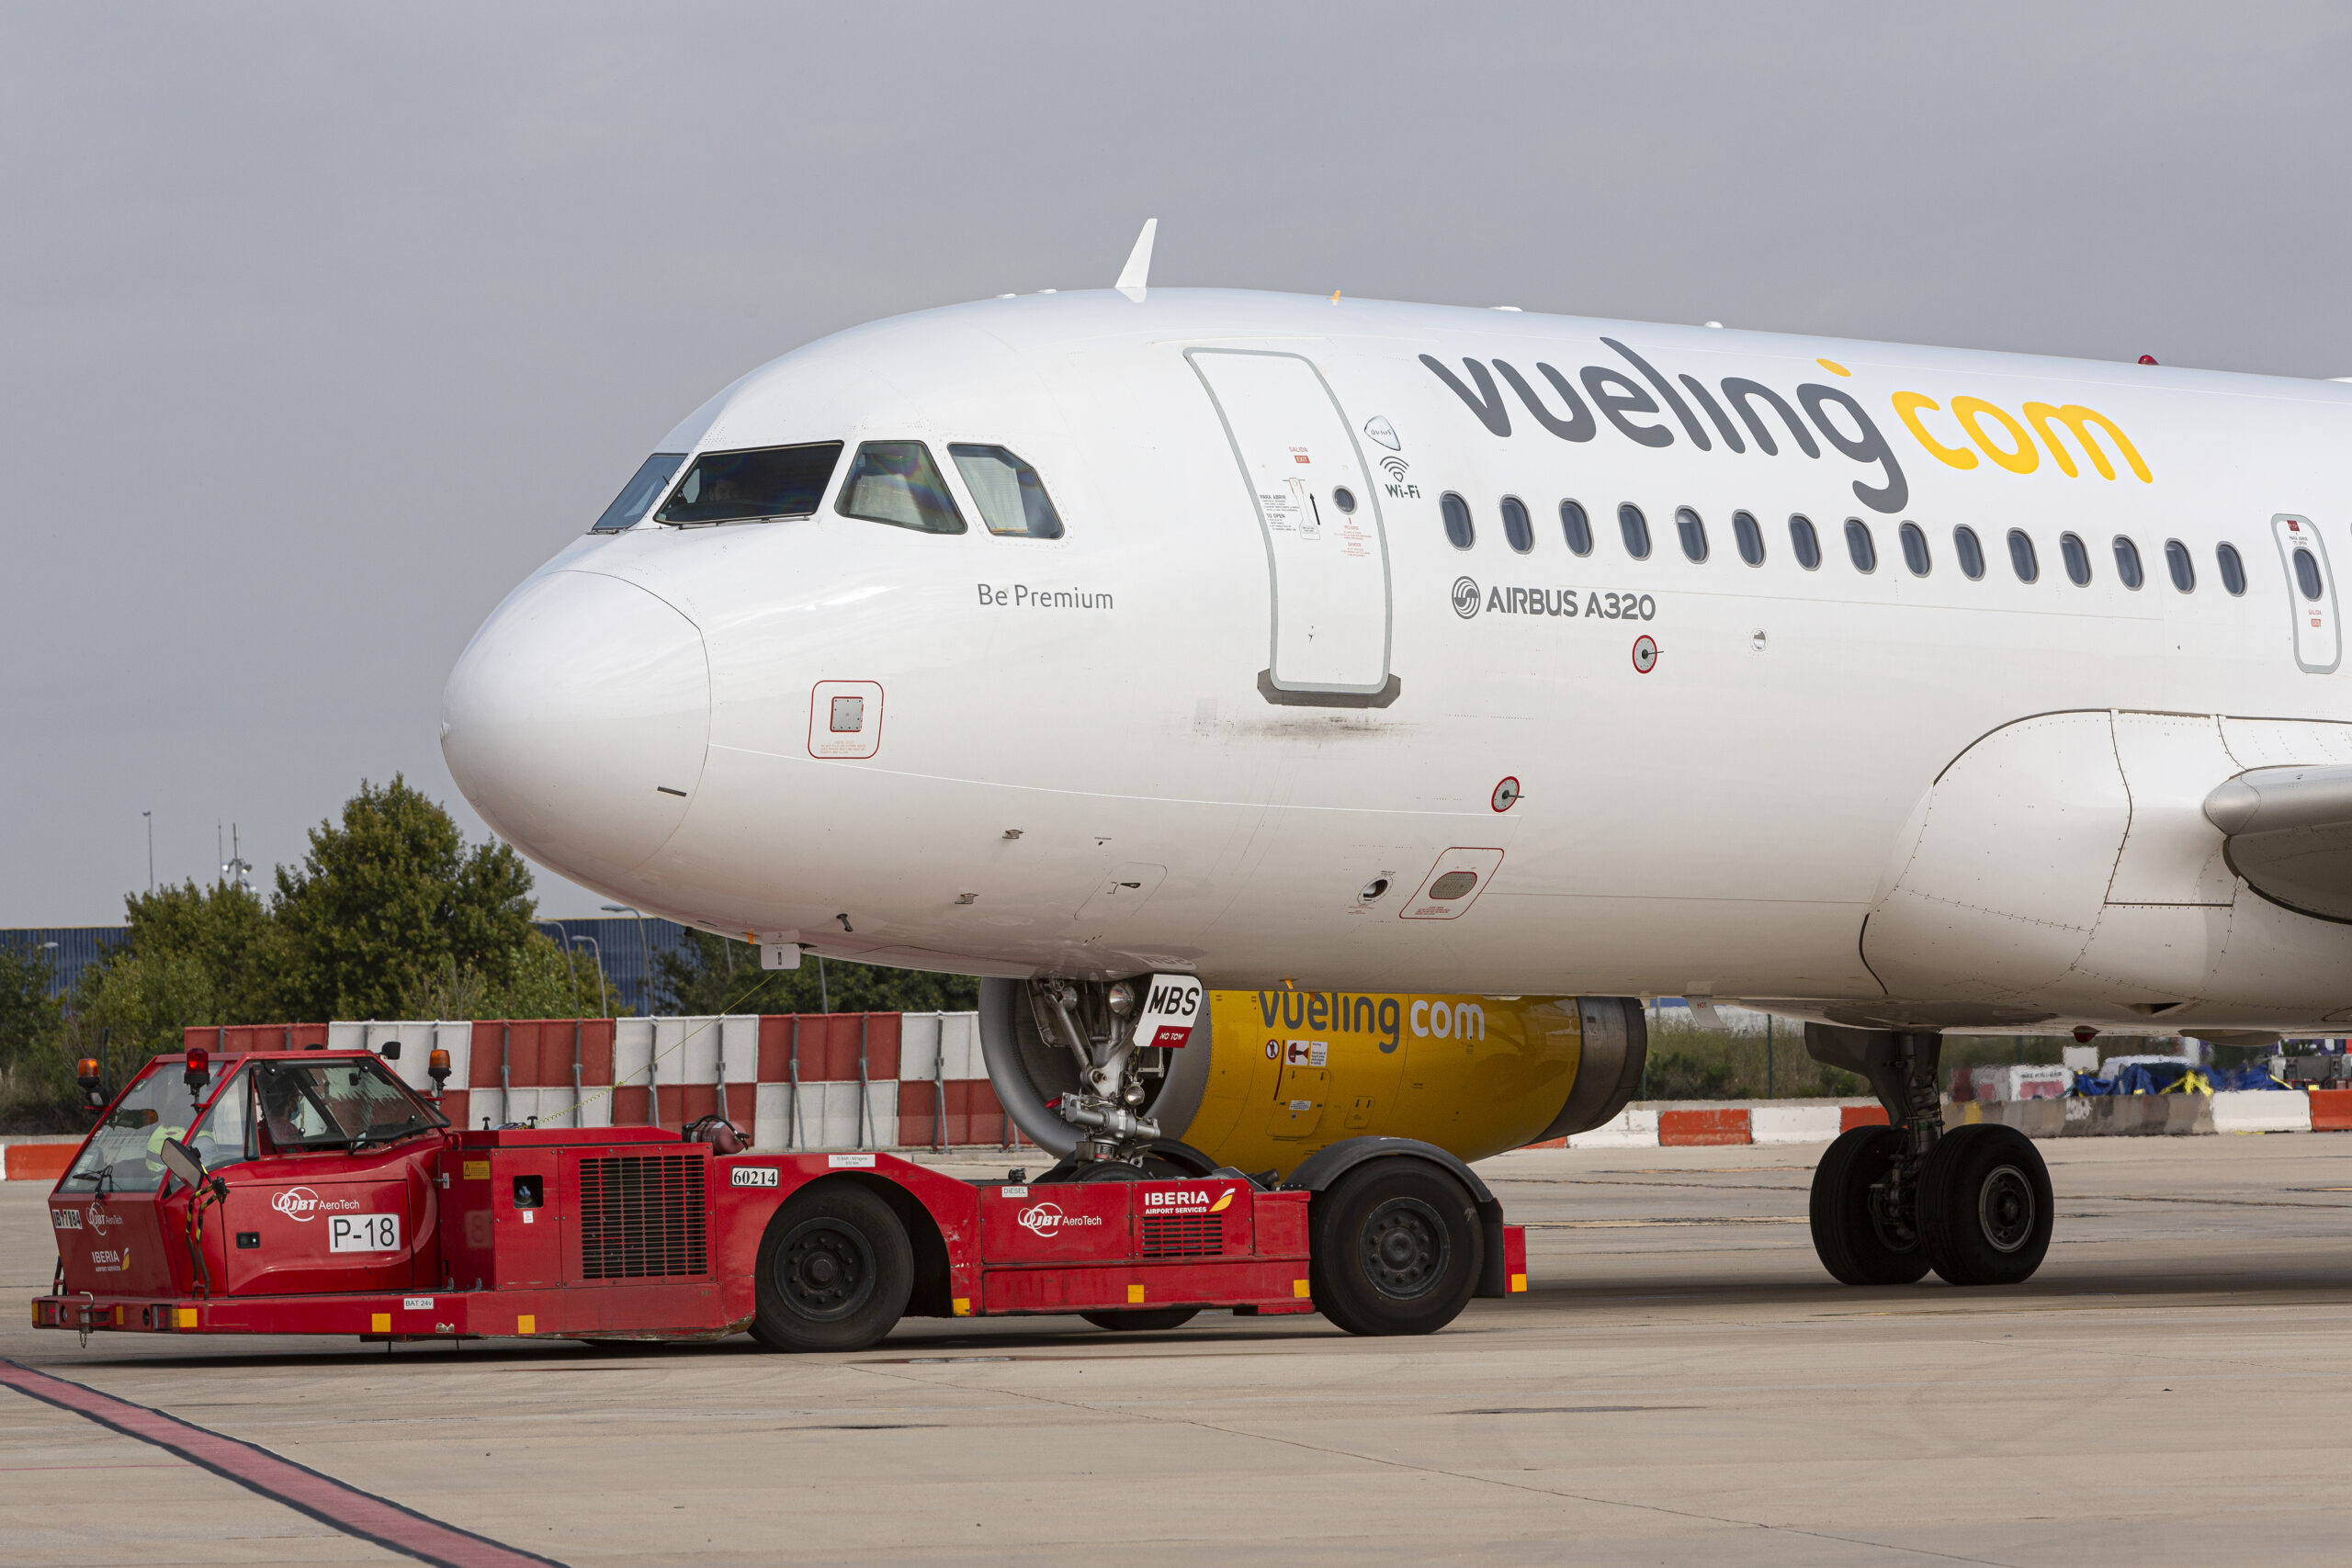 Vueling, Iberia and Iberia Express, Europe’s most punctual airlines in July